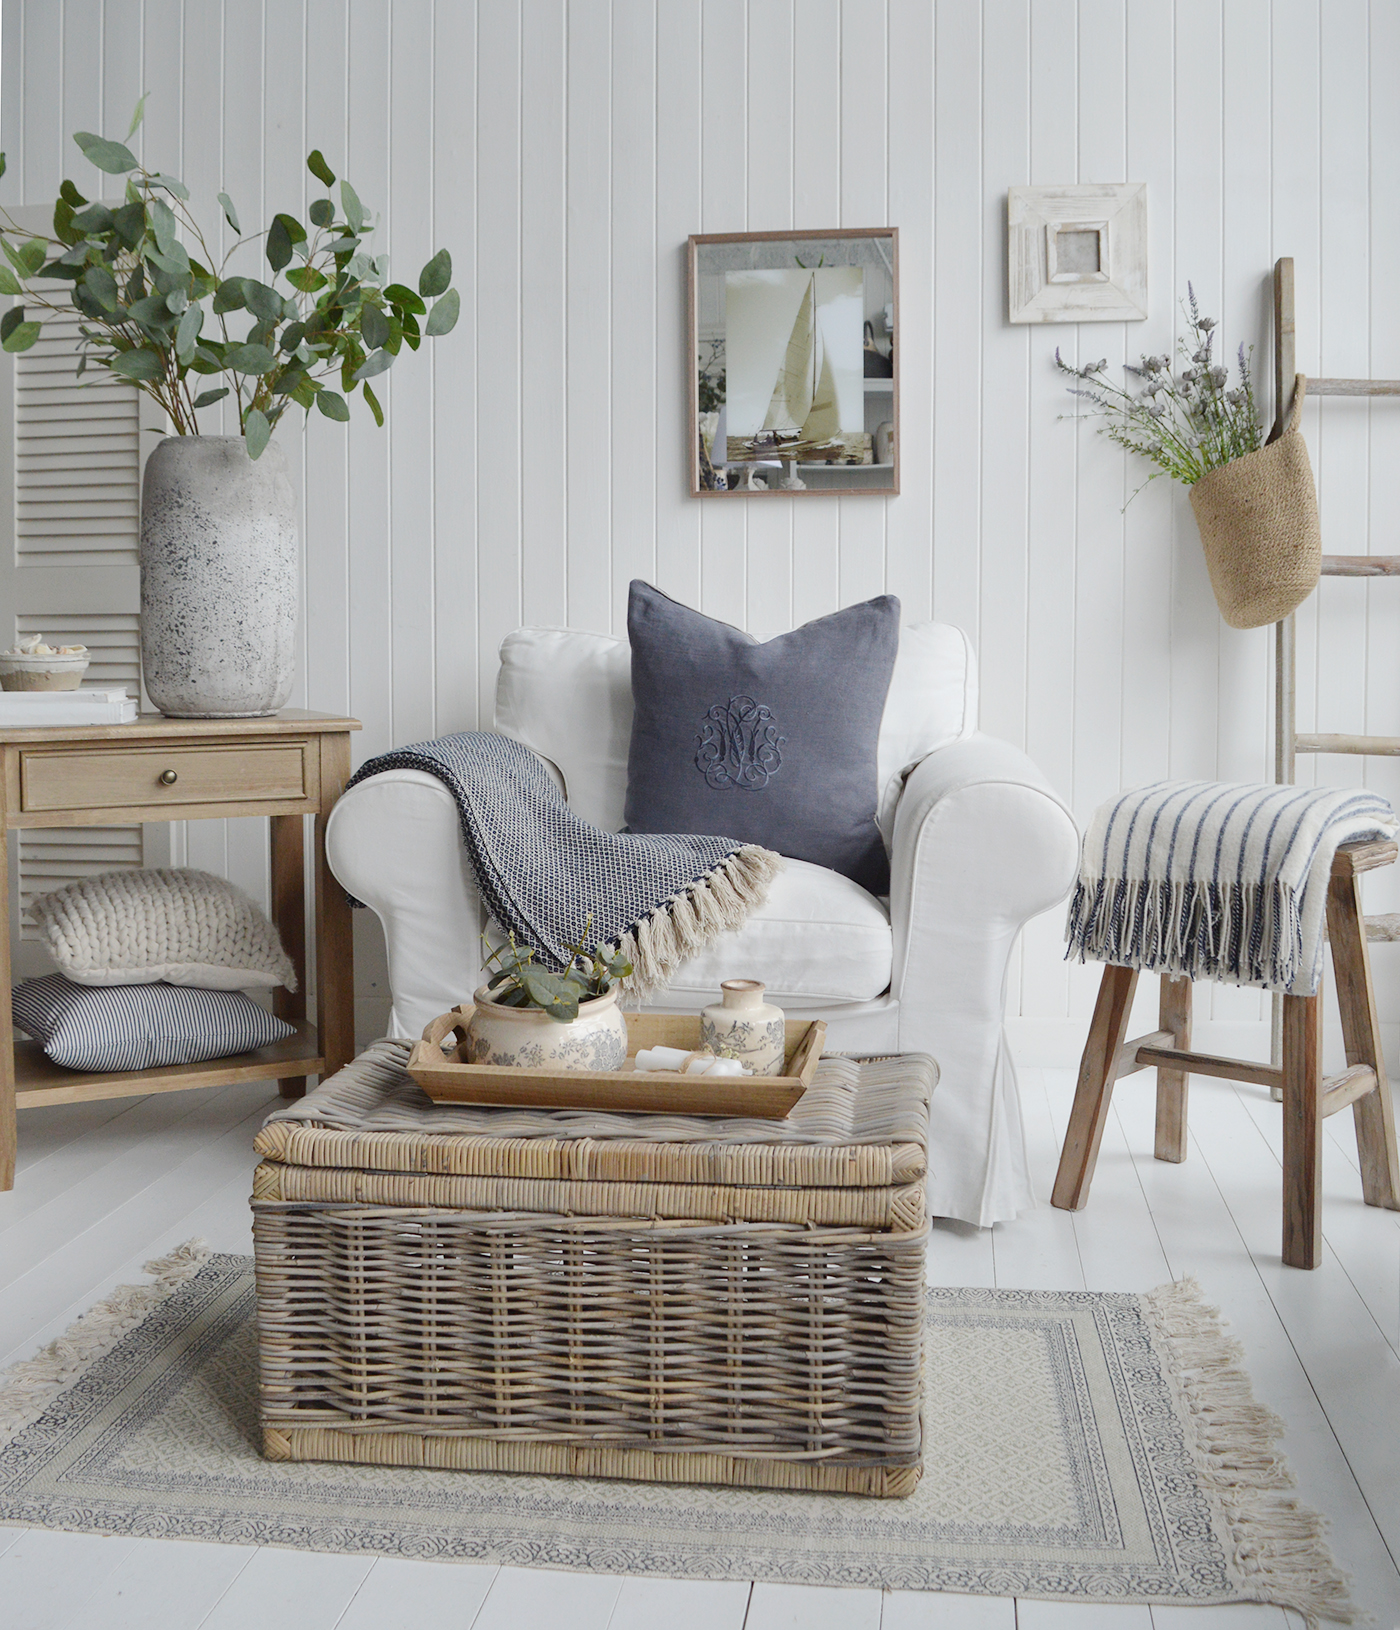 New England interiors for coastal, modern farmhouse, country and Hapmtons styled living room interiors